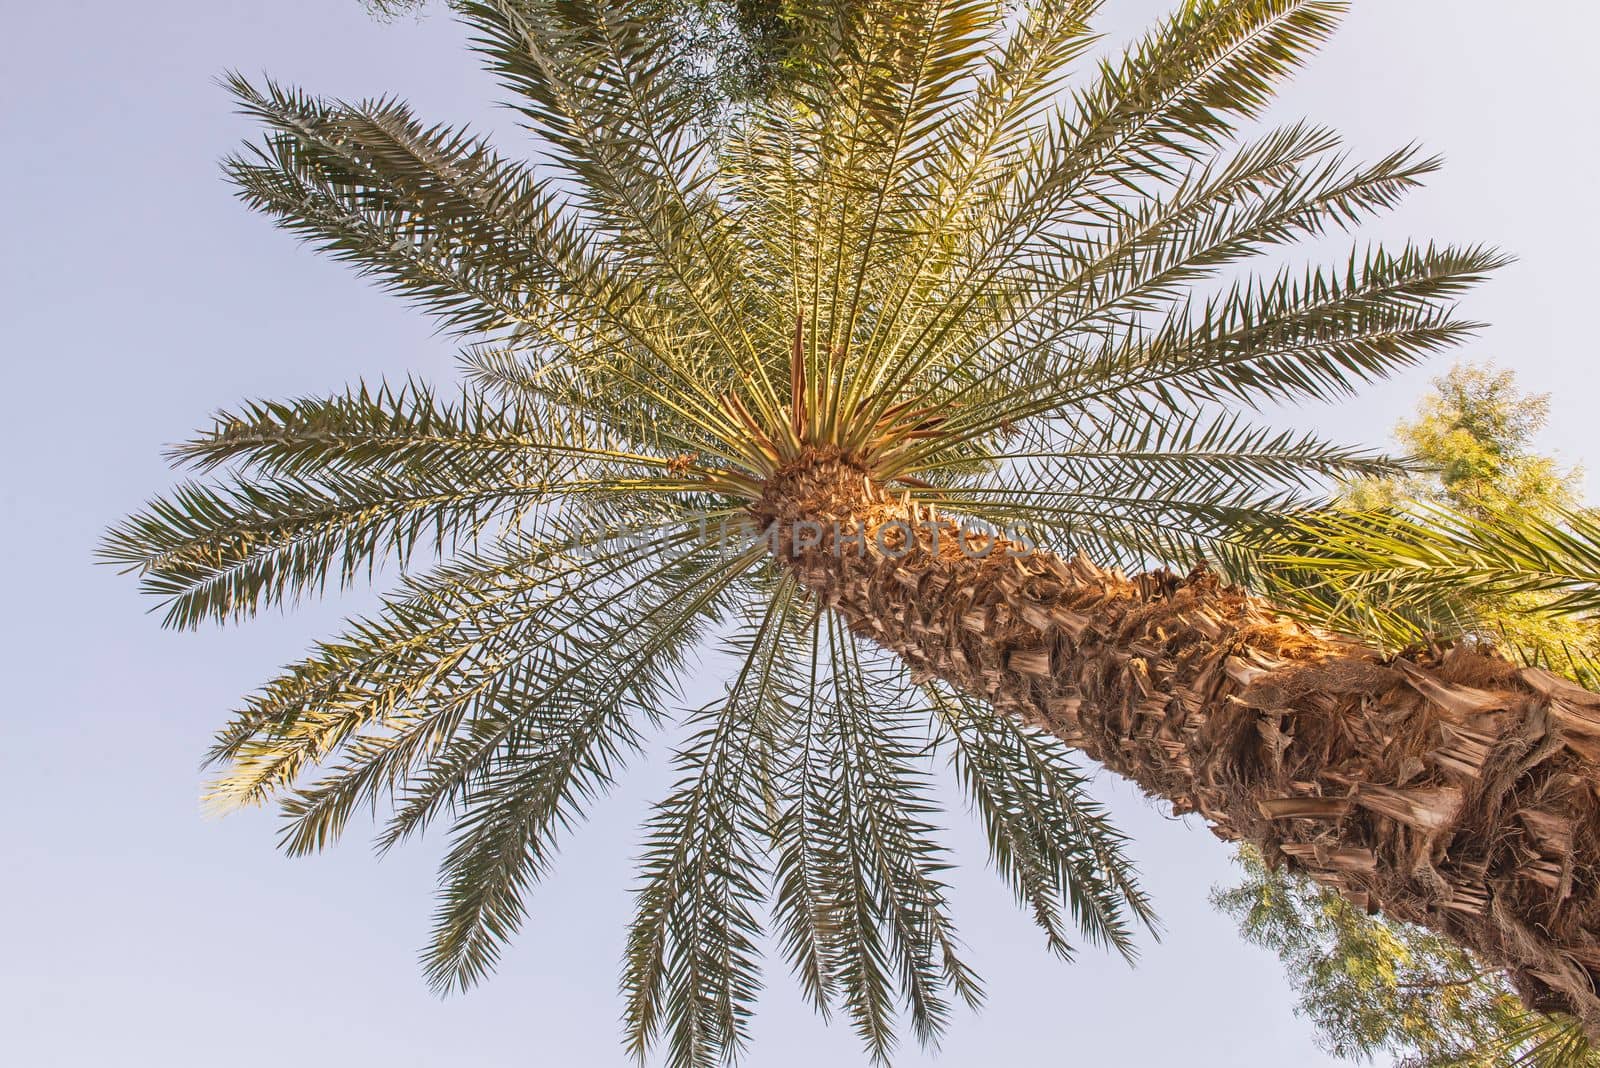 Abstract view of large date palm tree from below by paulvinten